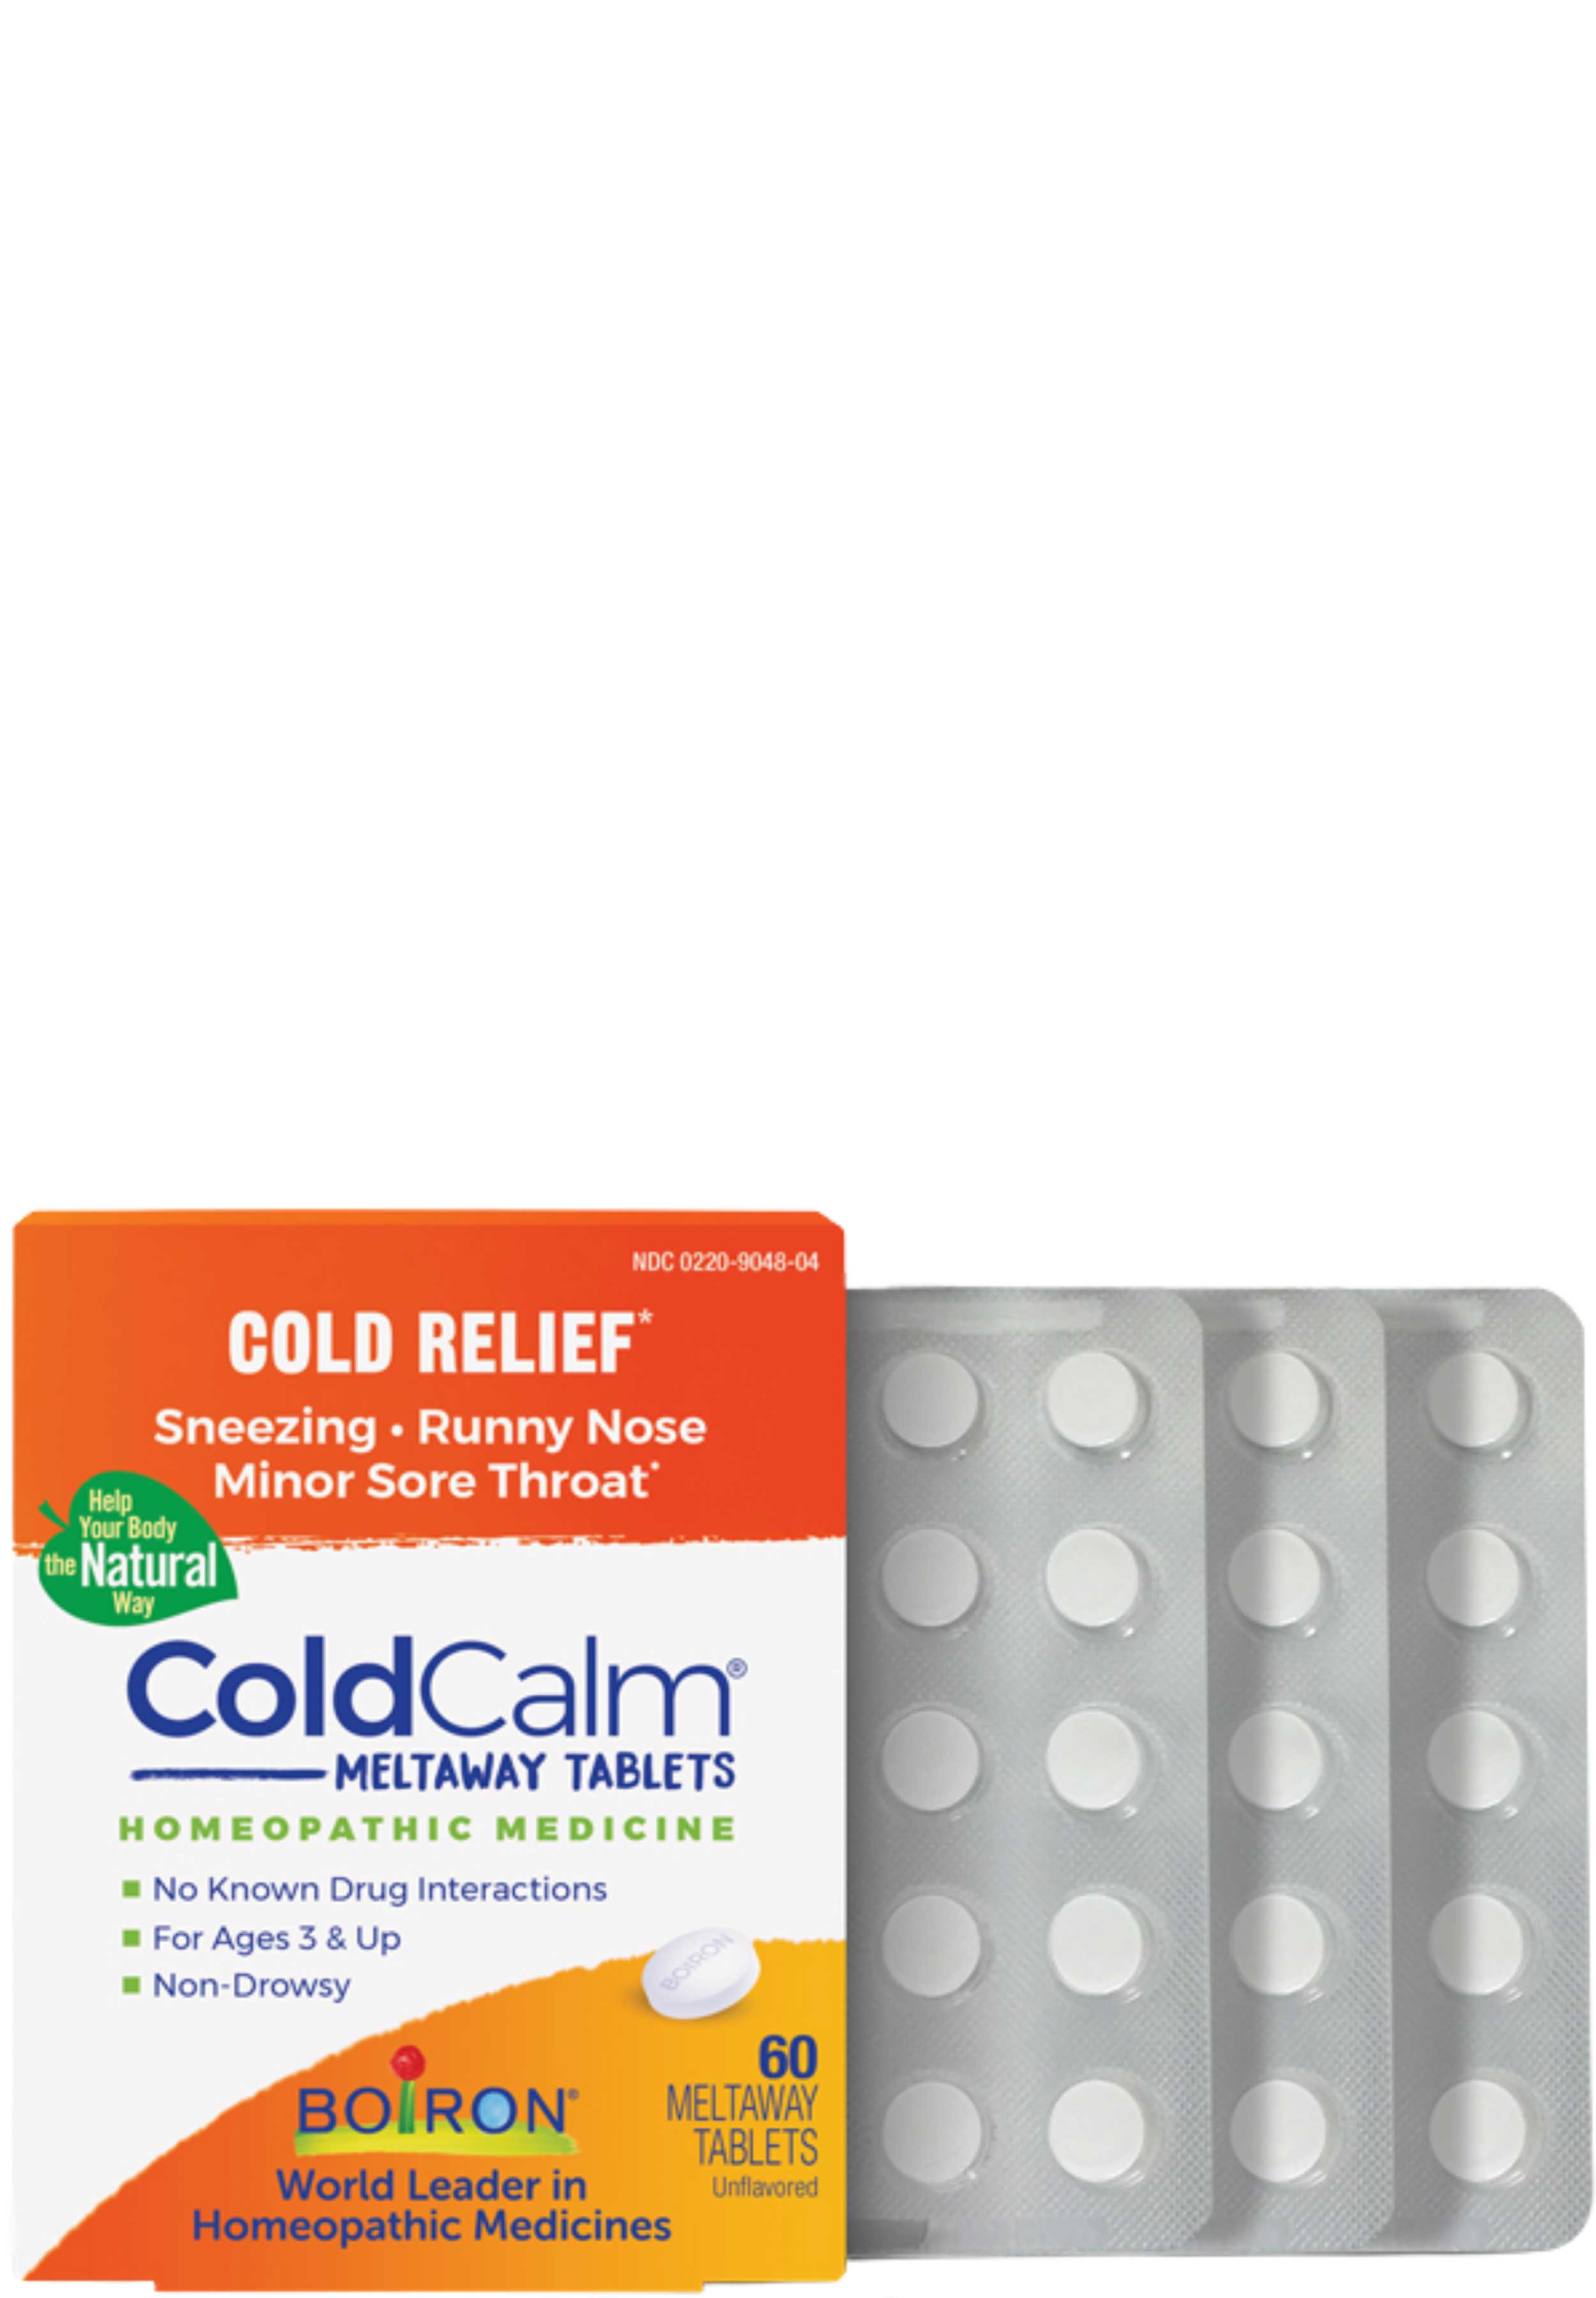 Boiron Homeopathics Coldcalm